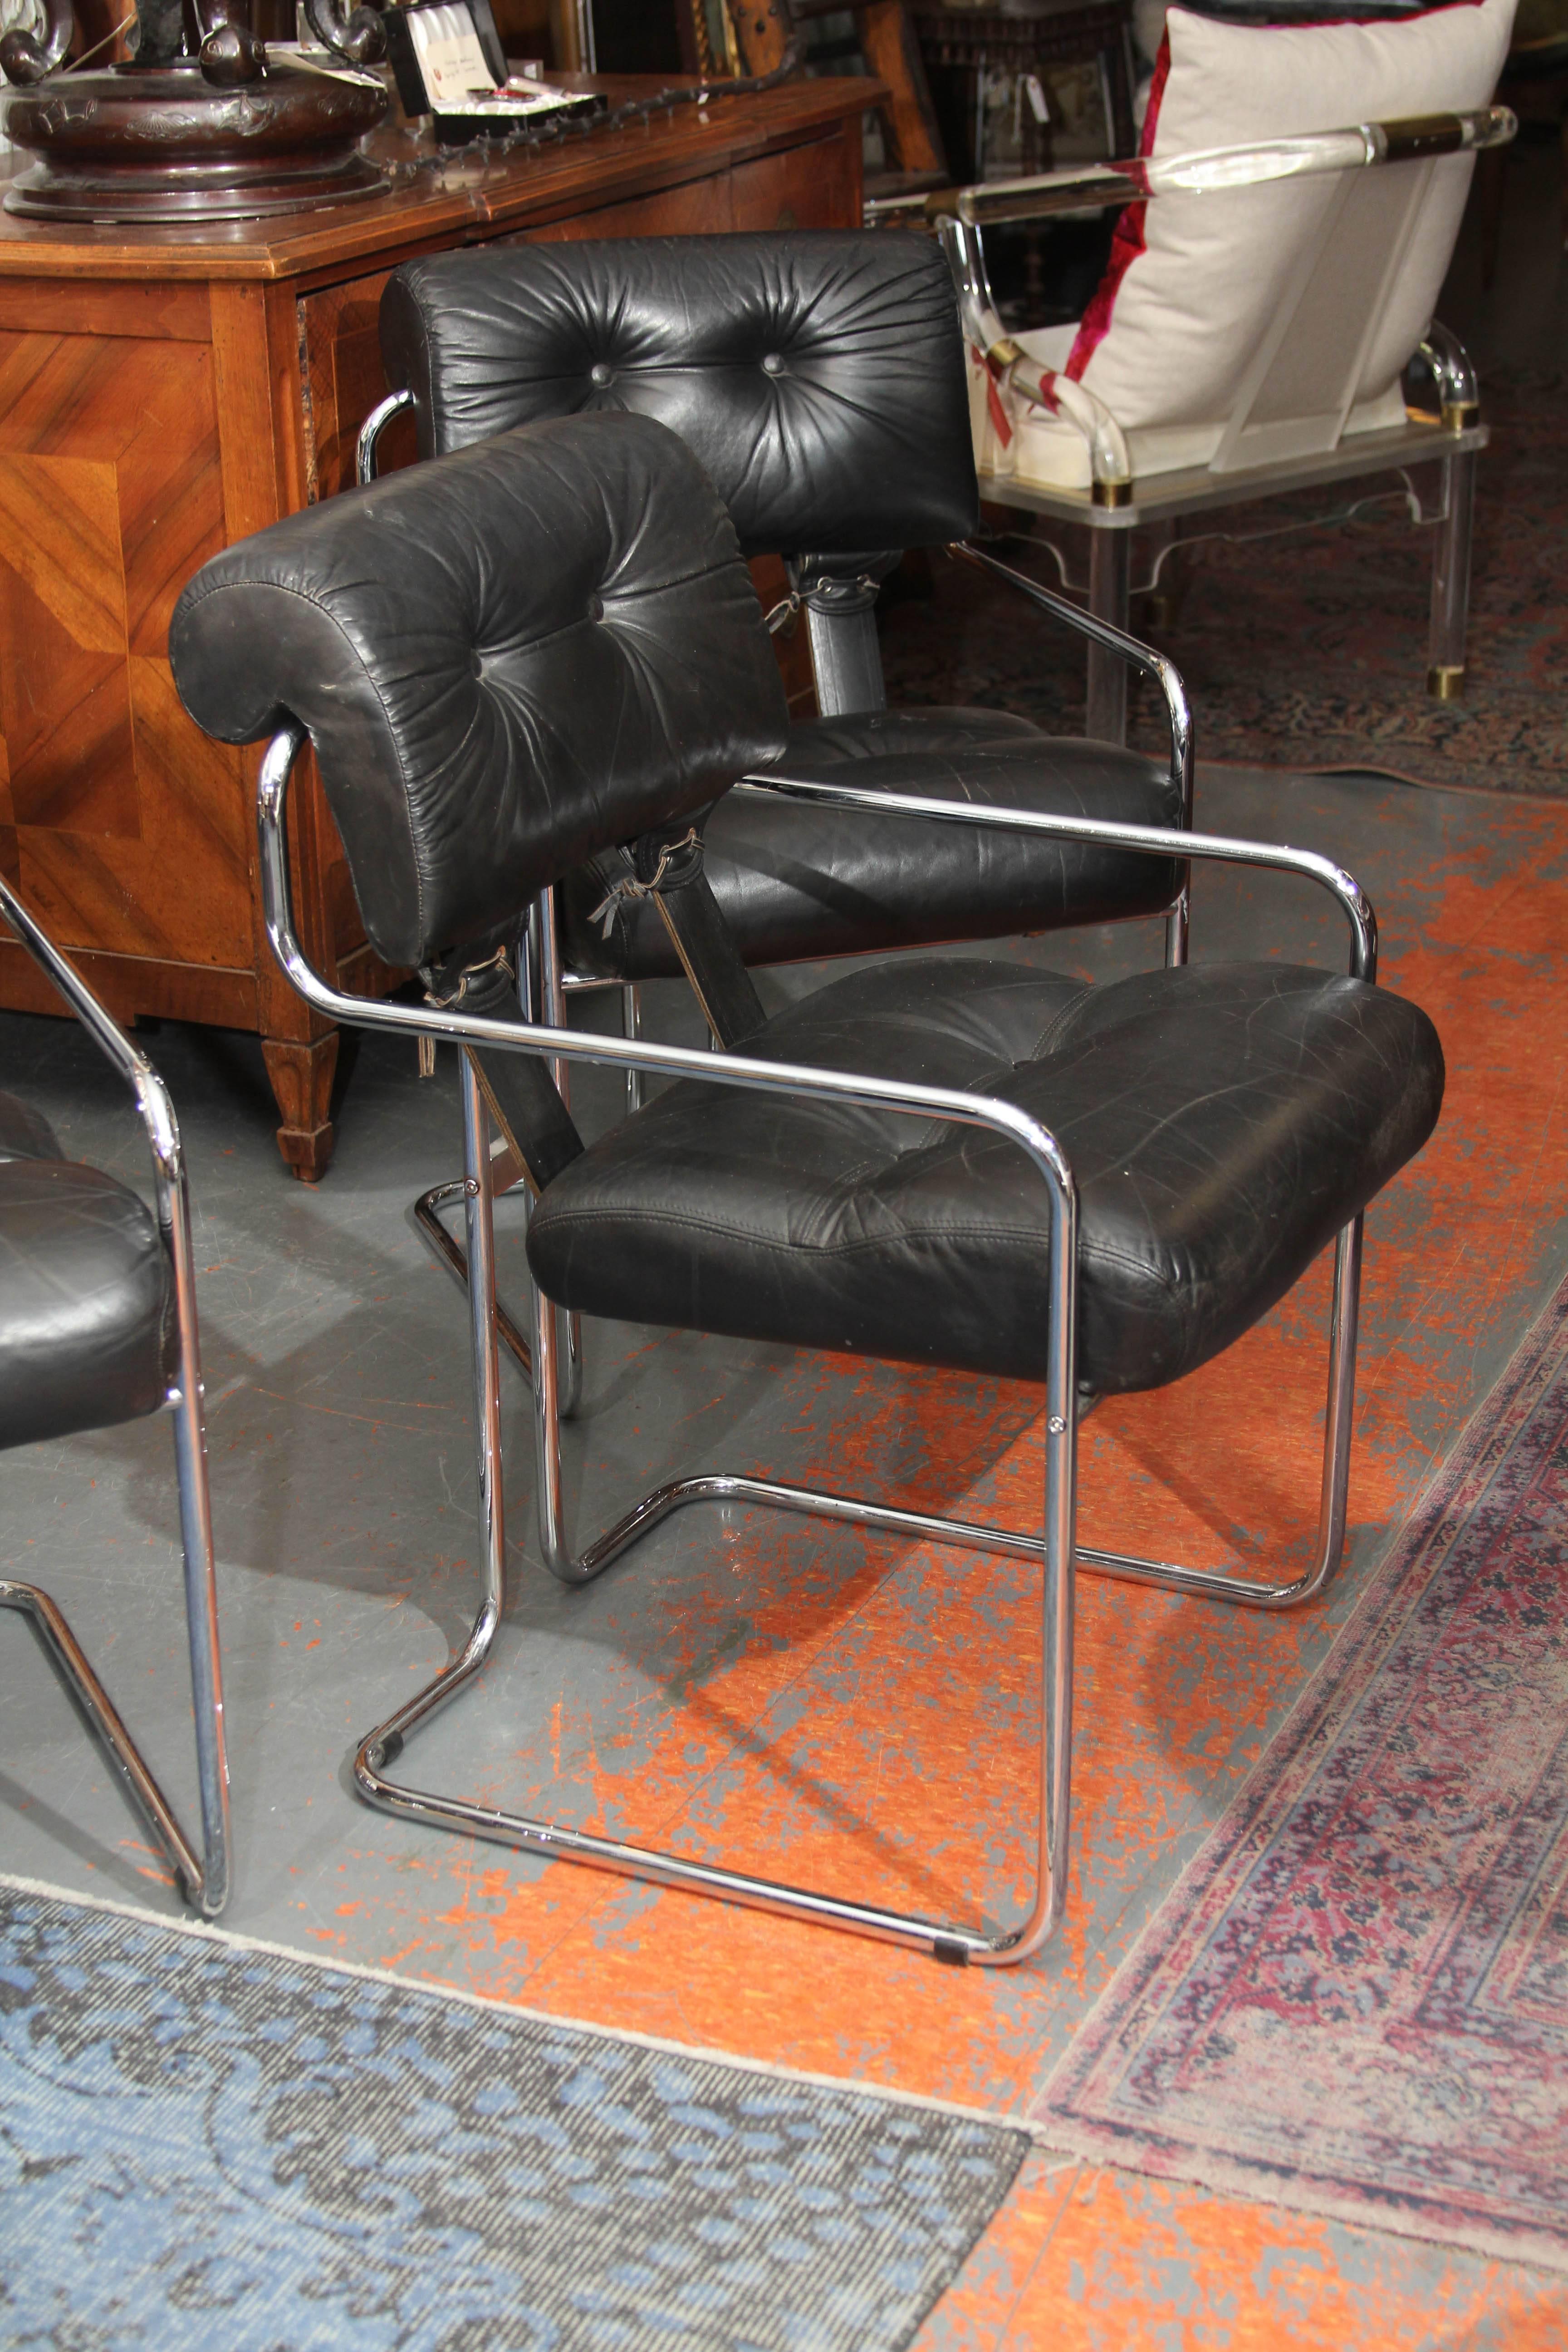 Mariani for the Pace Collection set of four chairs in black leather with leather lacing front and back. Chromed frame, very comfortable chairs. Great as side chairs or at a dining table.